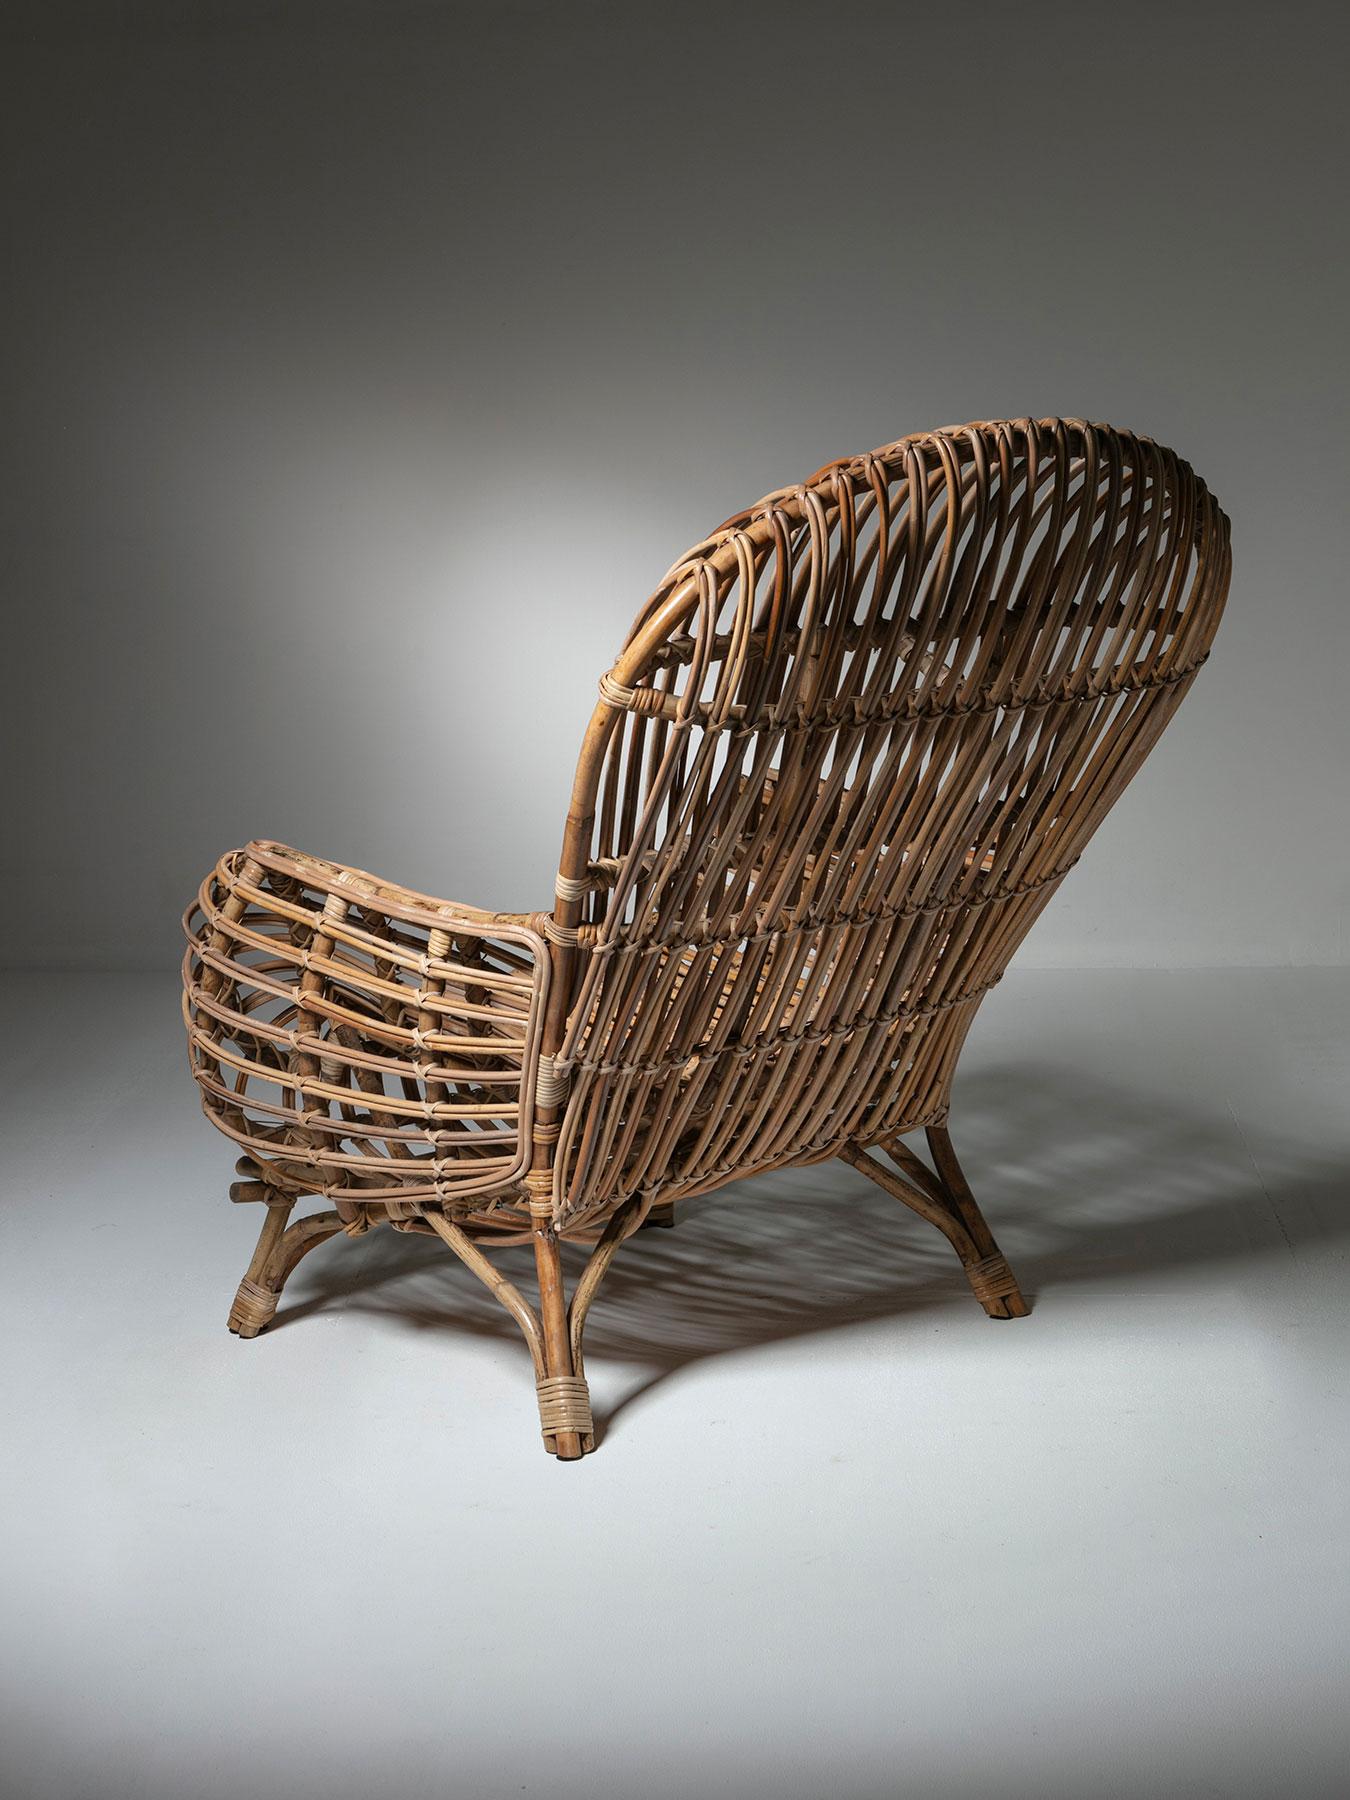 Imposing wicker lounge chair attributed to Fratelli Castano.
Removable cushion.